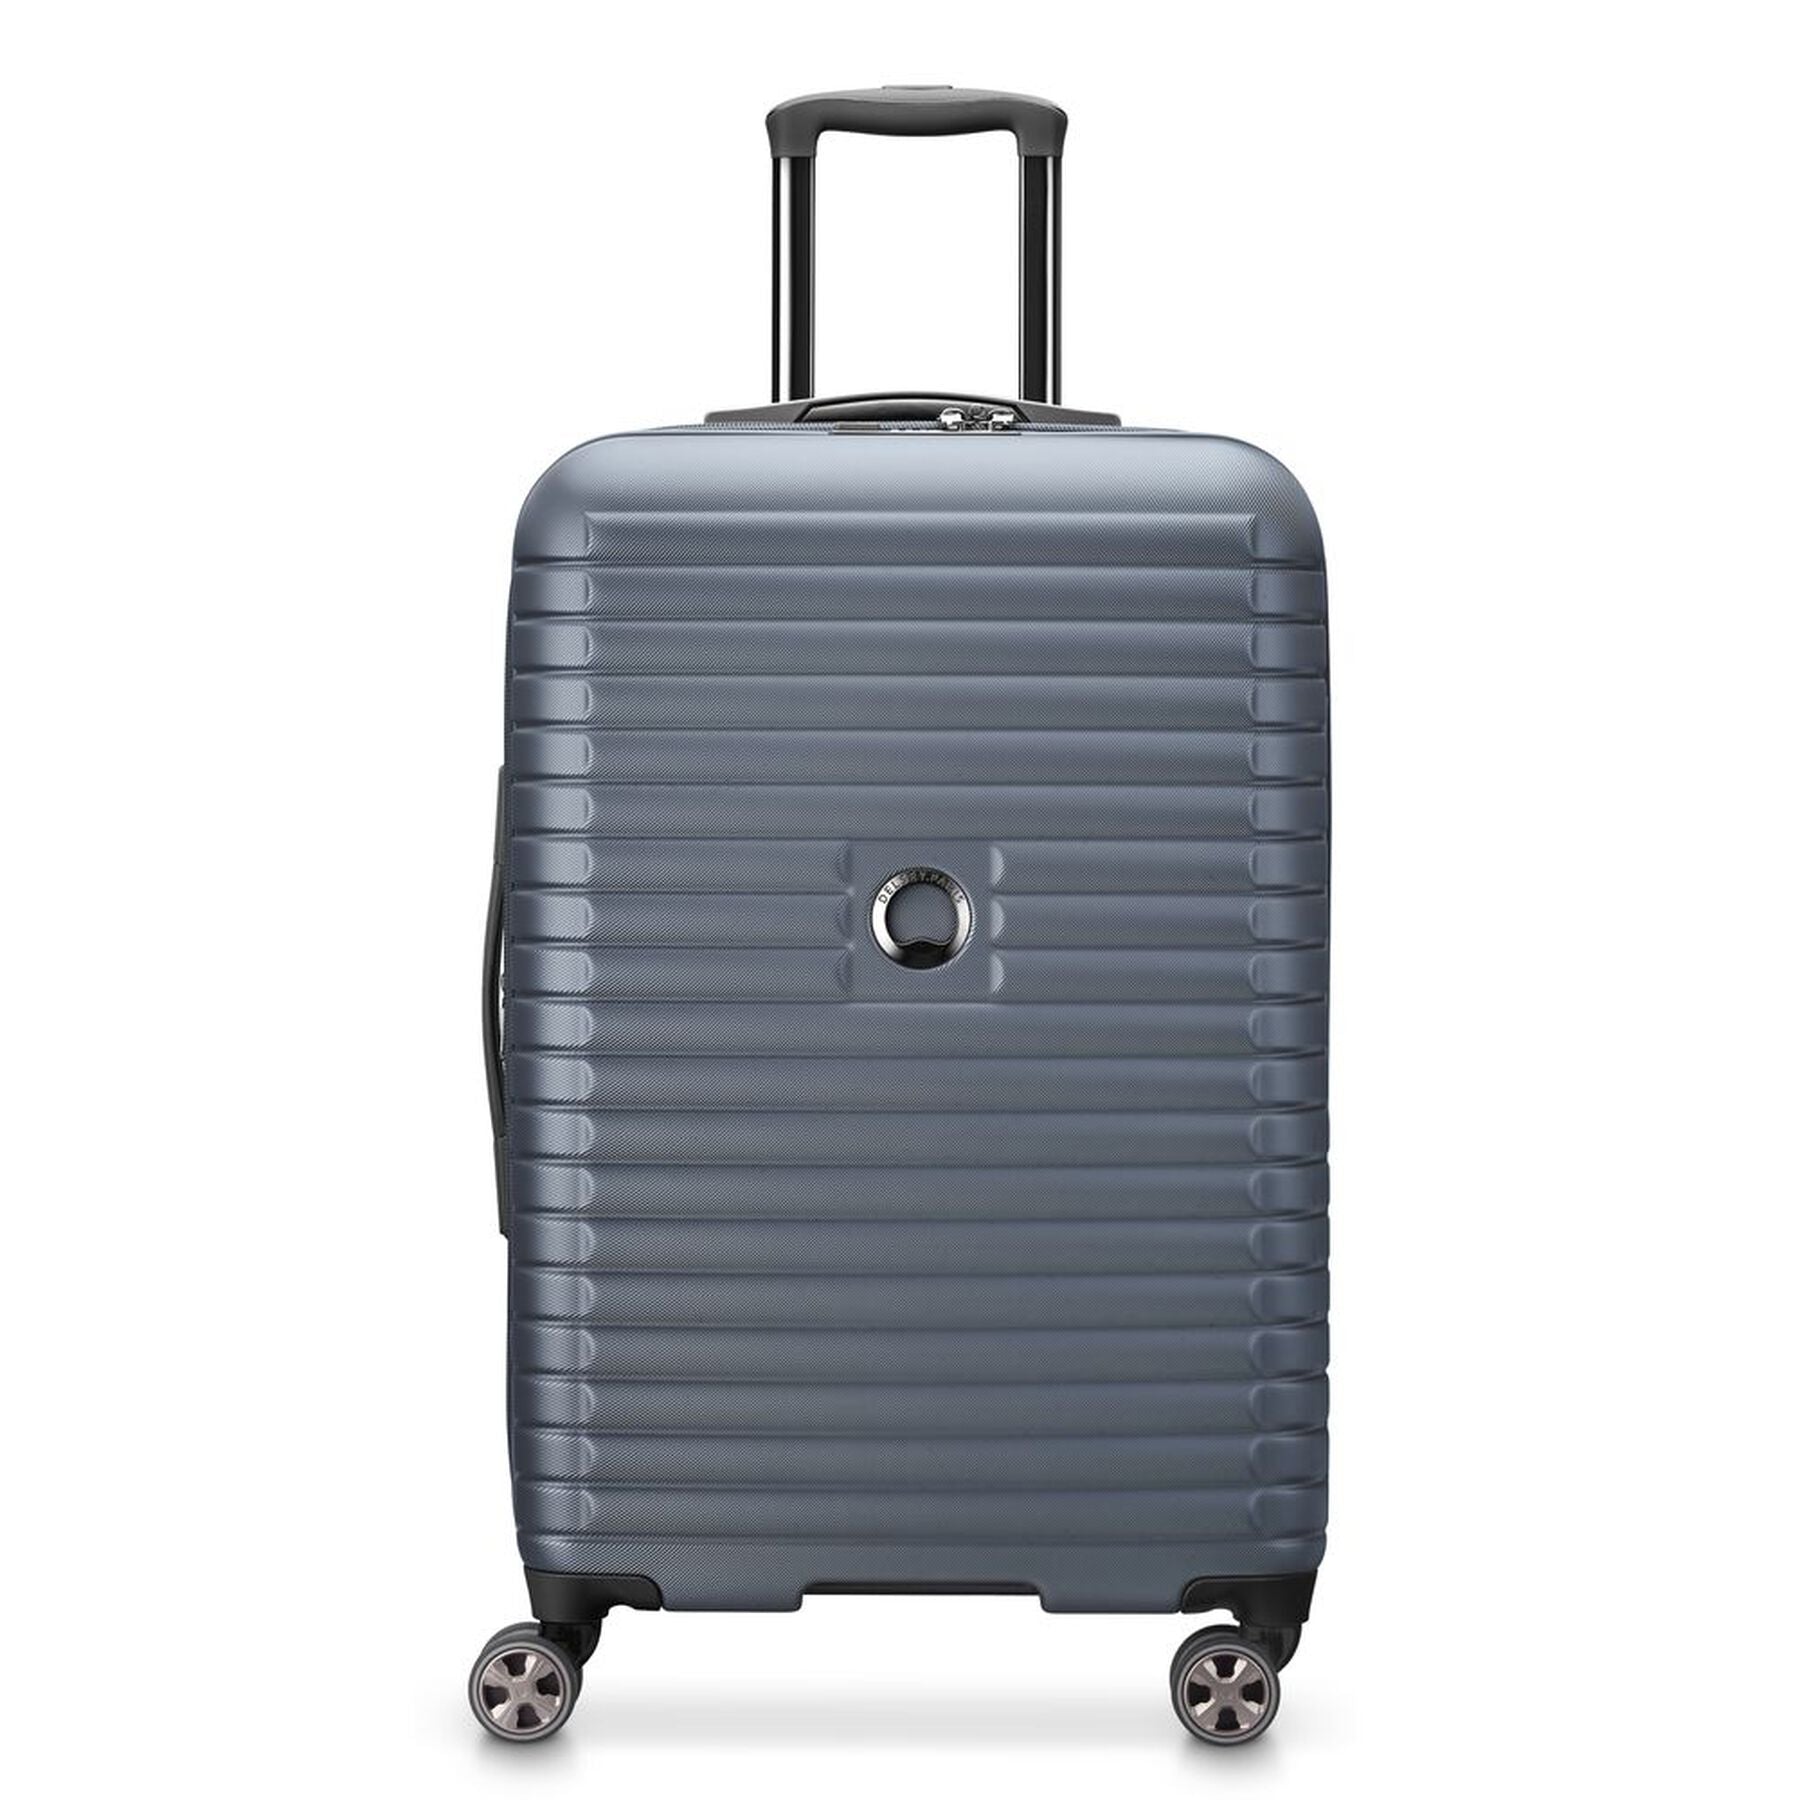 Delsey Cruise 3.0 24" Expandable Spinner Upright